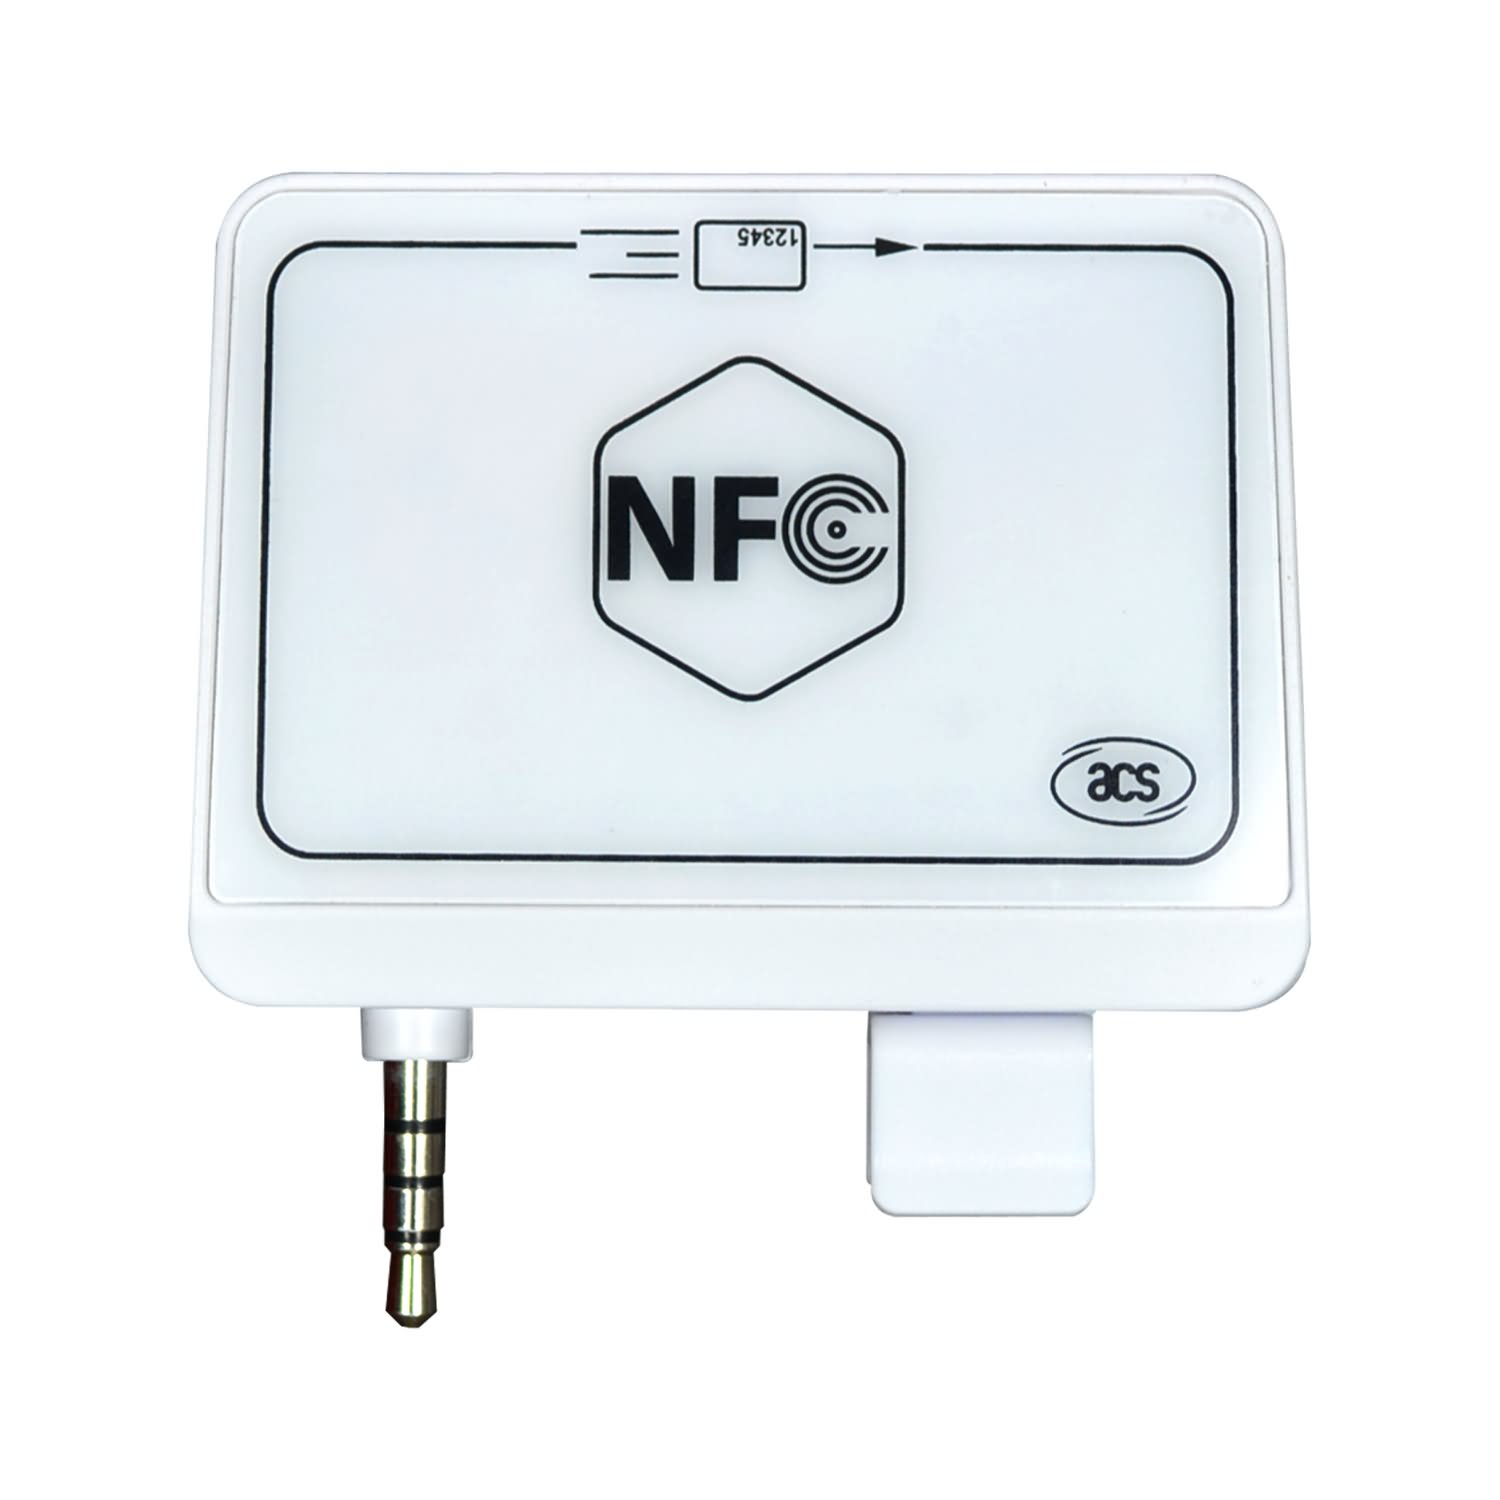 ACR35 NFC Mobile Mate Card Reader Featured Image